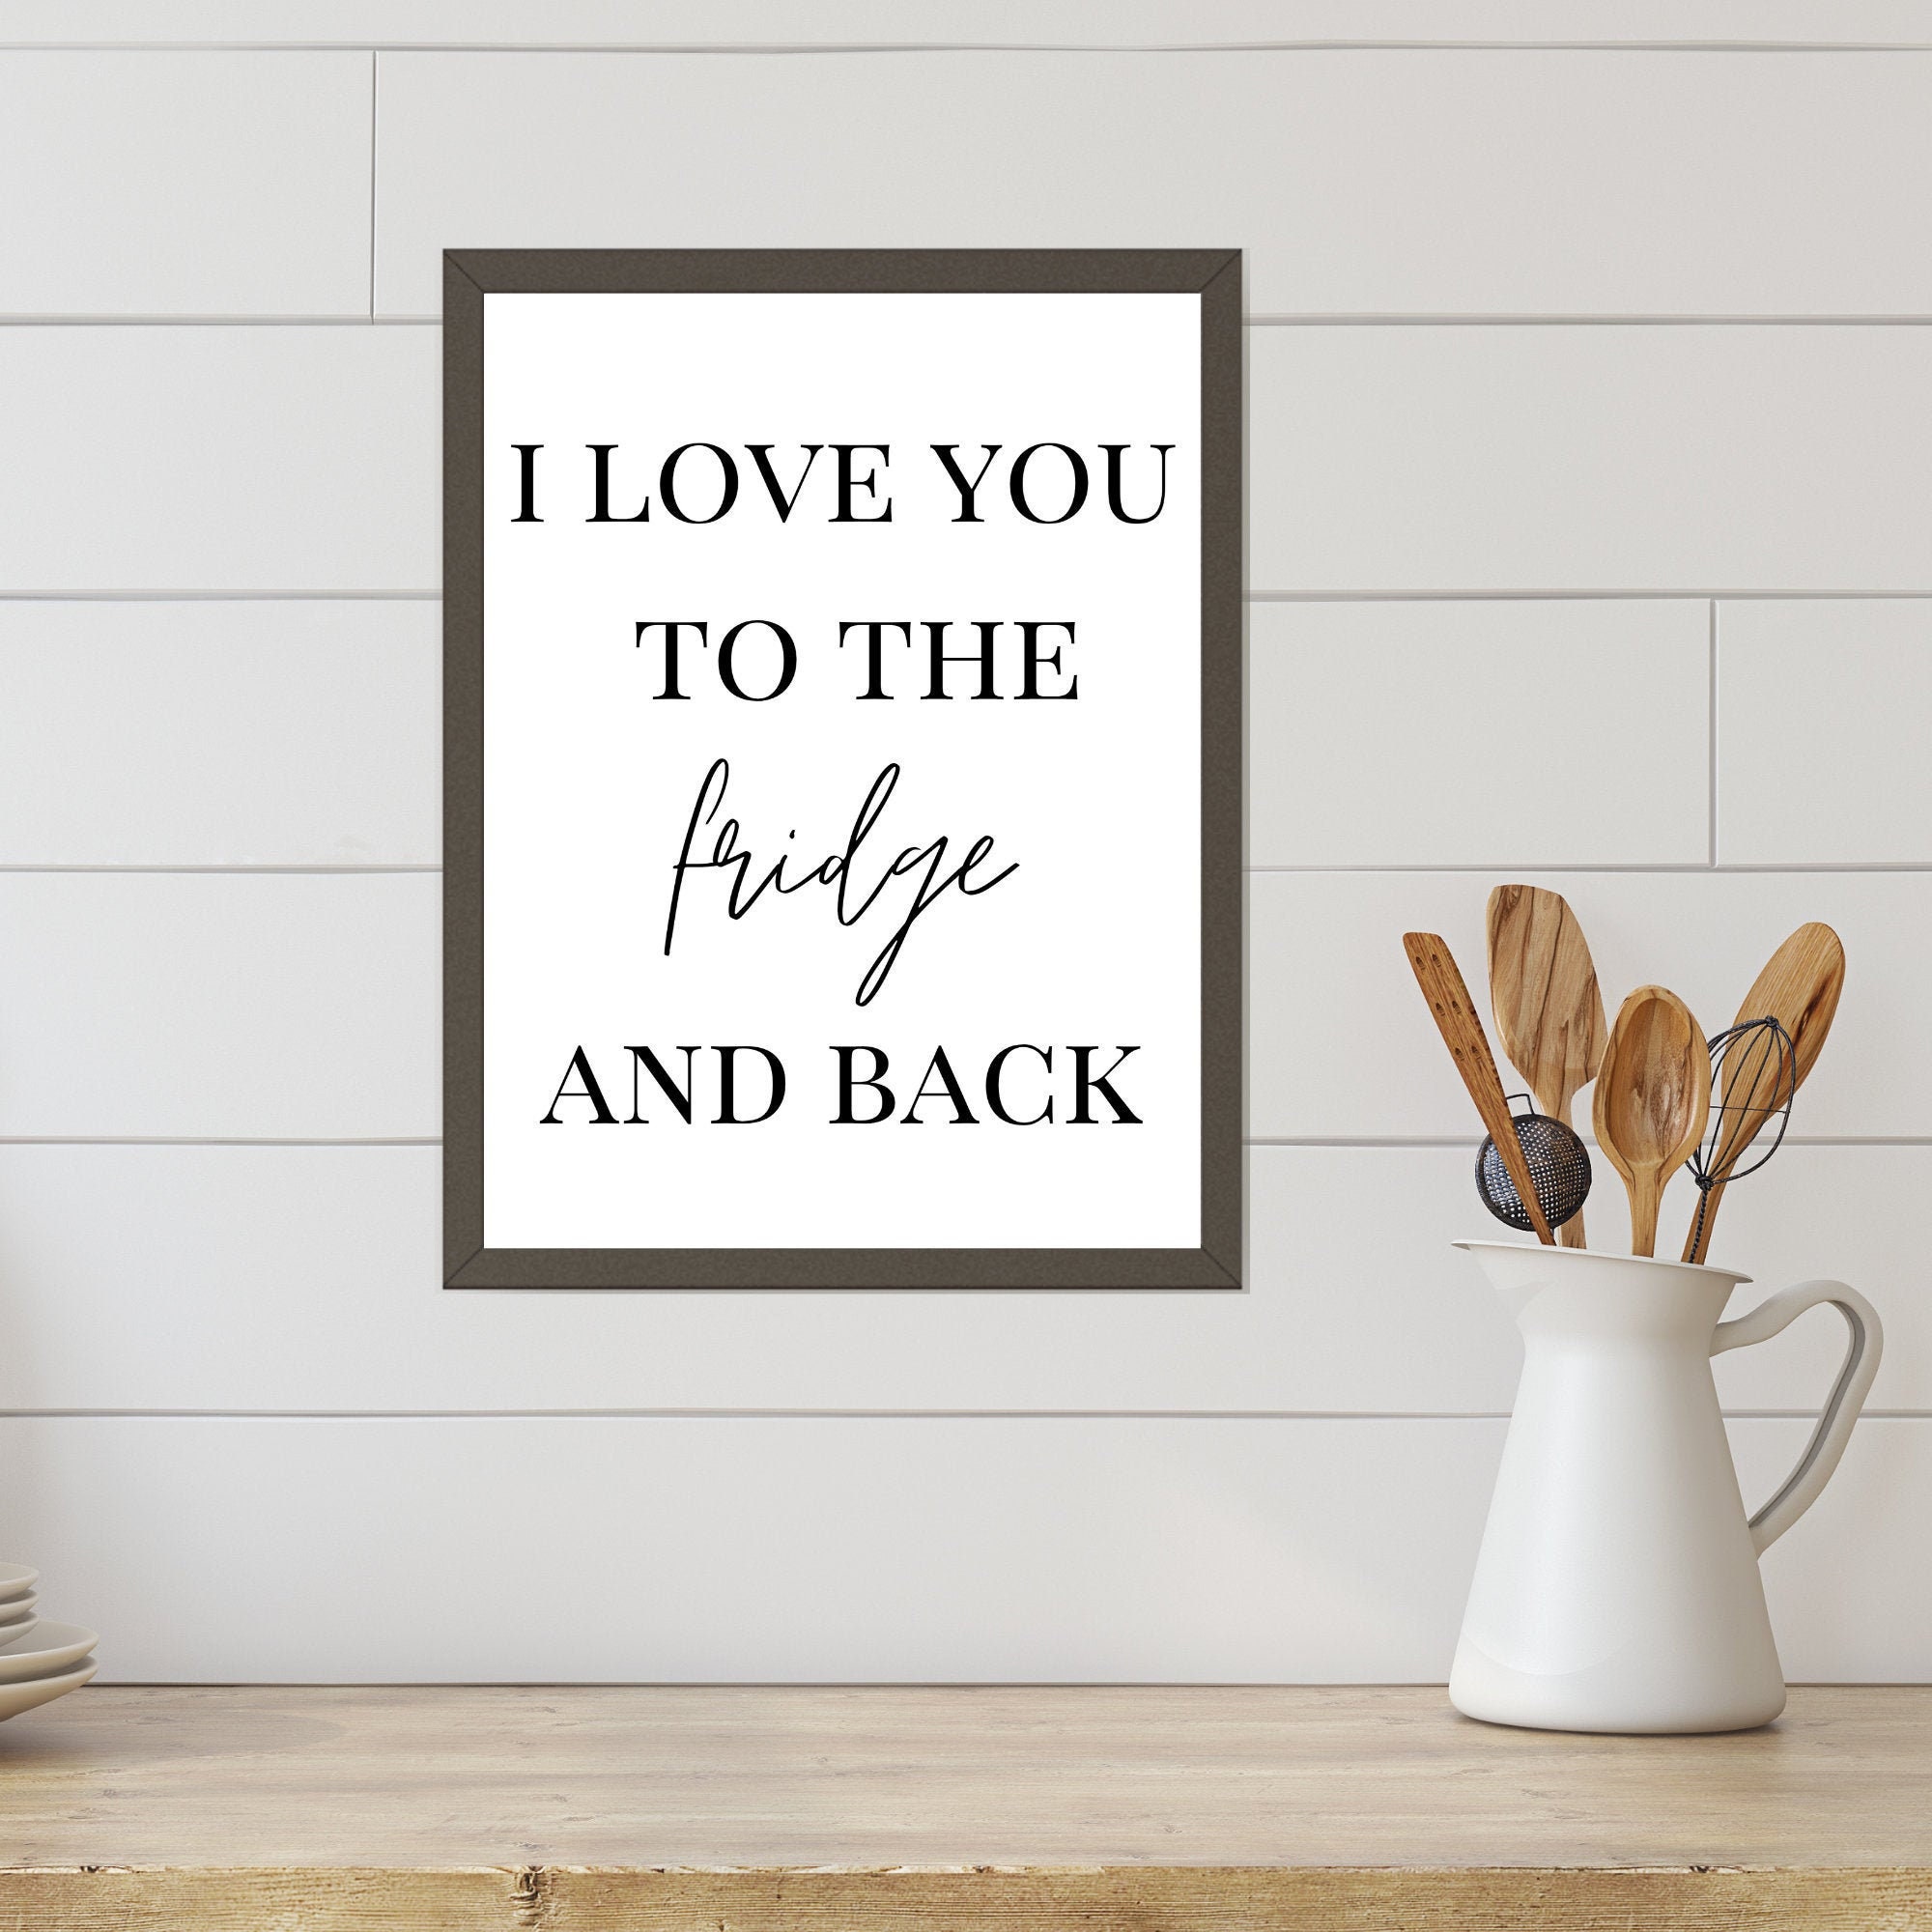 Welcome to Our Kitchen Printable Wall Art – To Simply Inspire